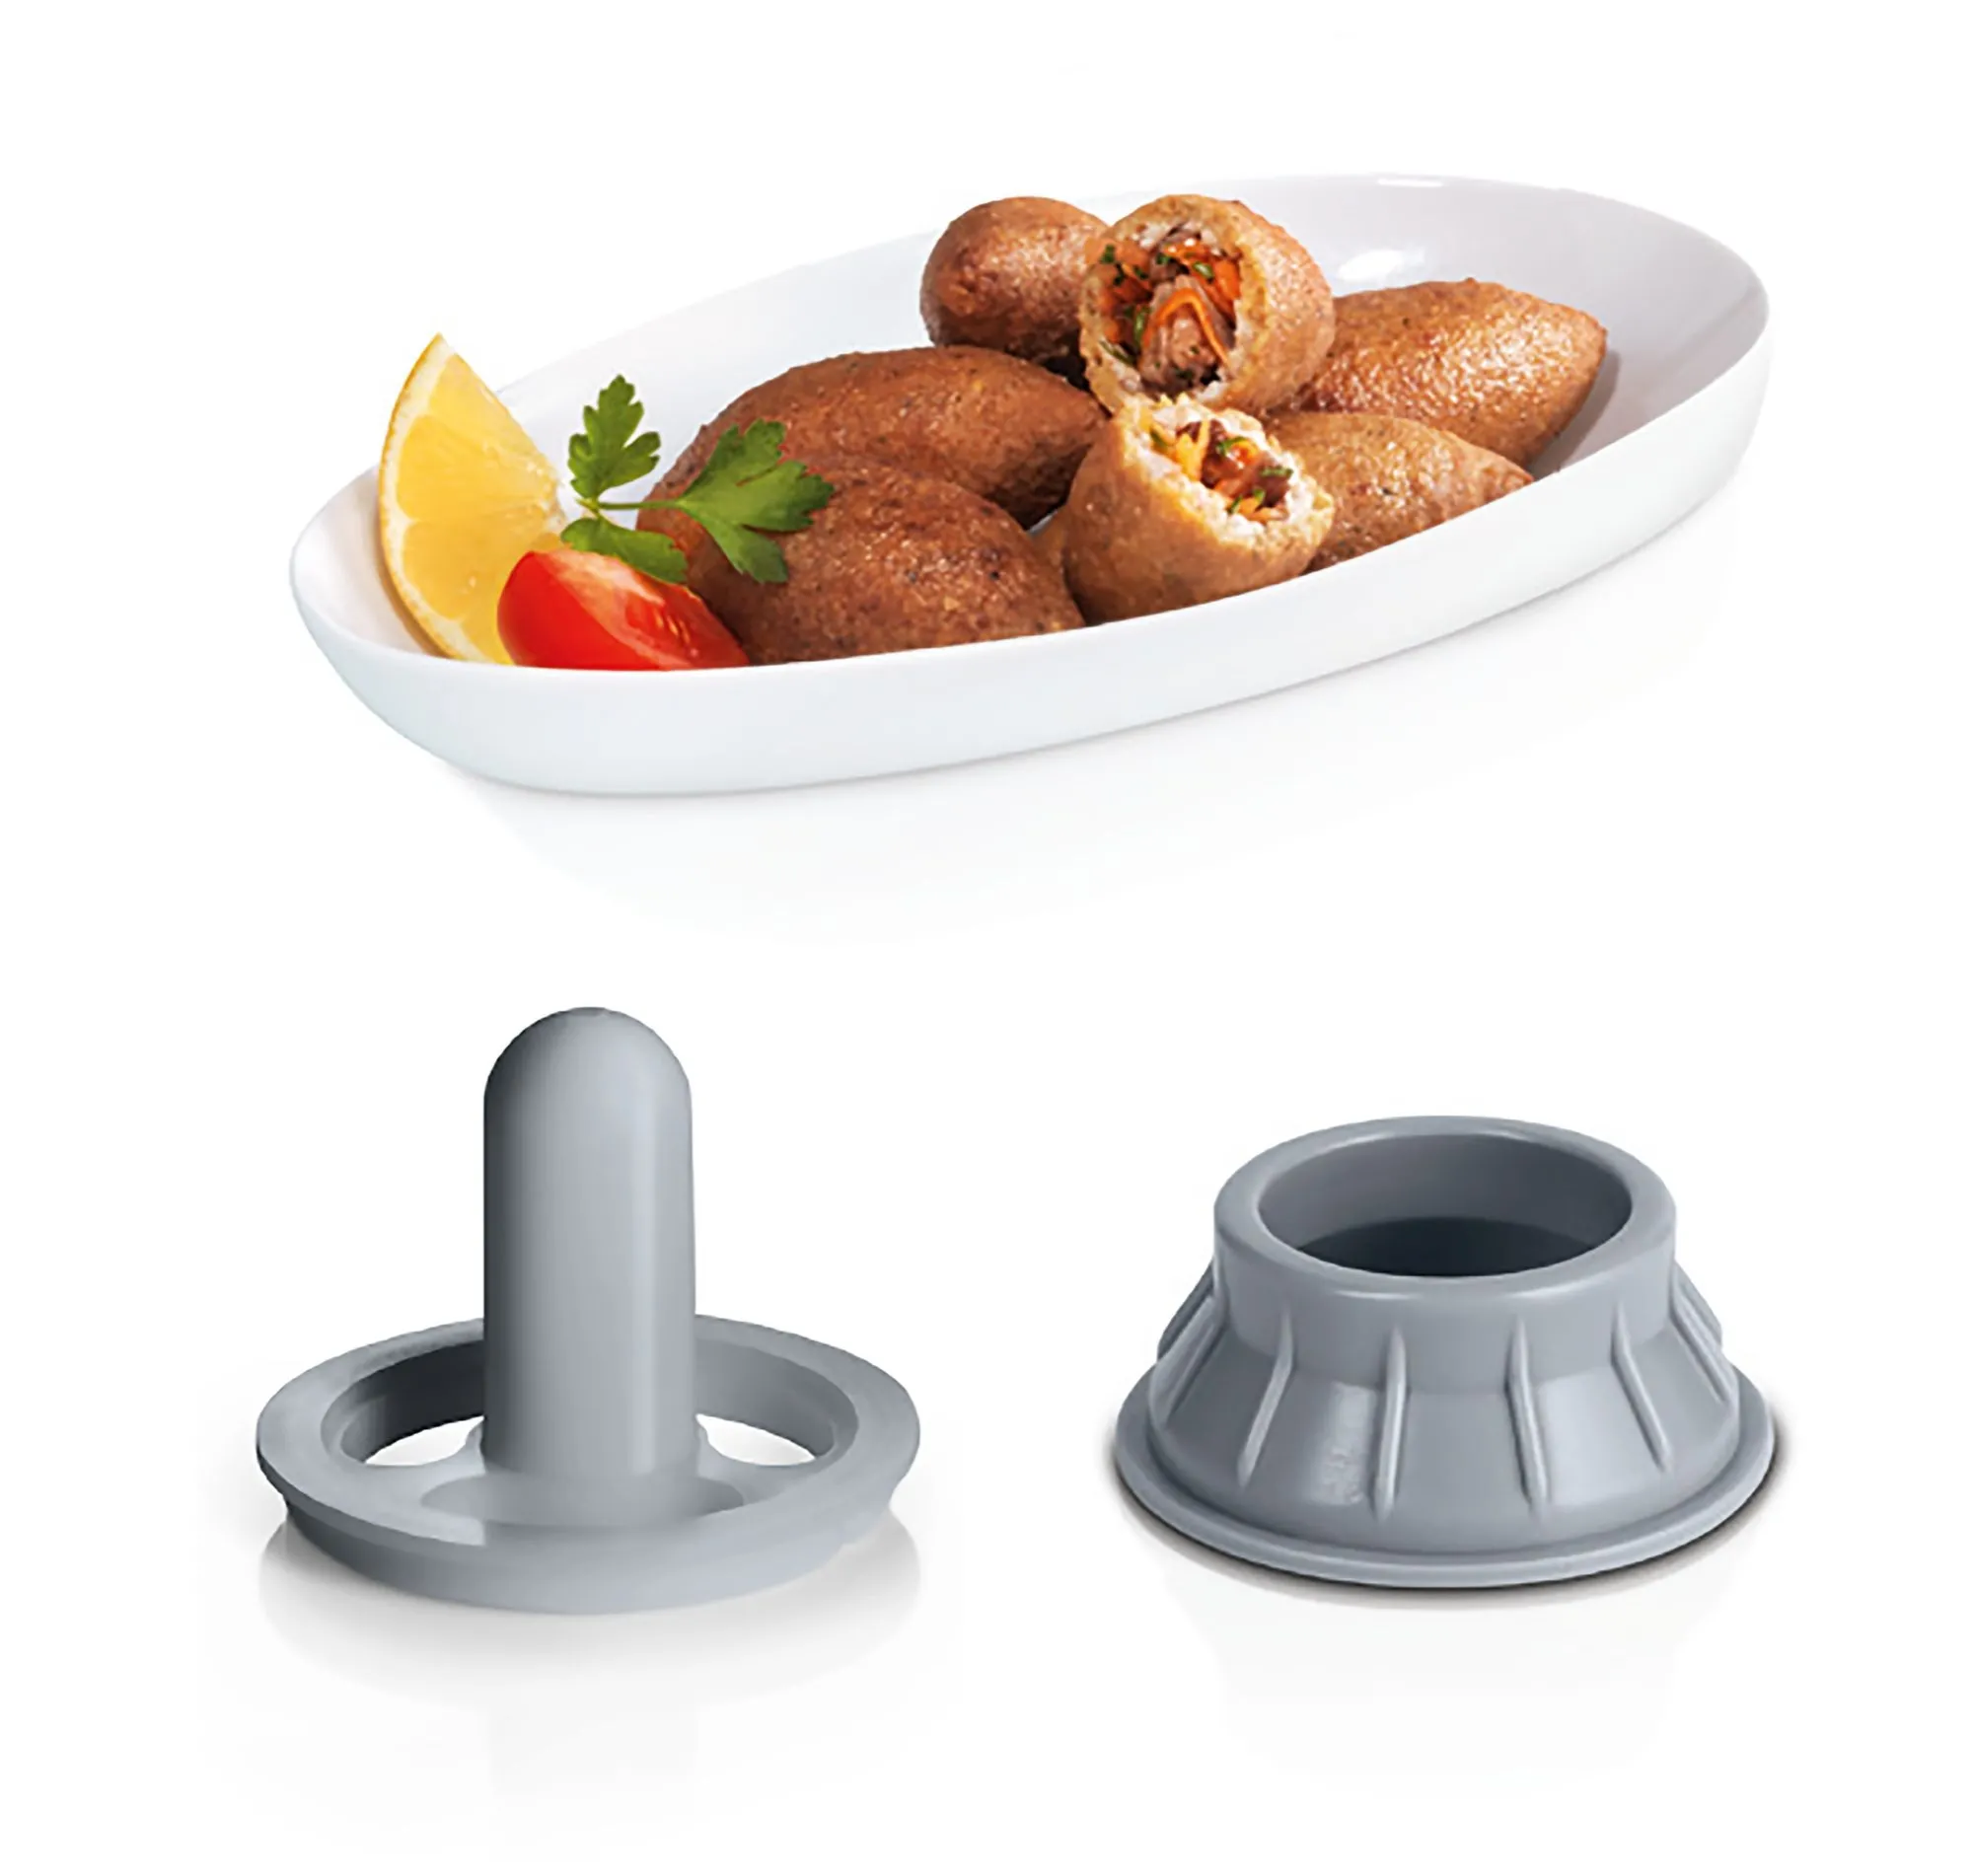 Месомелачка, Bosch MFW67450, Meat mincer ProPower, 700W - 2000W, Discs: 3 / 4,8 / 8 mm; Sausage attachment; Attachment for kibbutz / meatballs; Fruit pressing attachment; Out: 3.5kg/min, Black - image 6